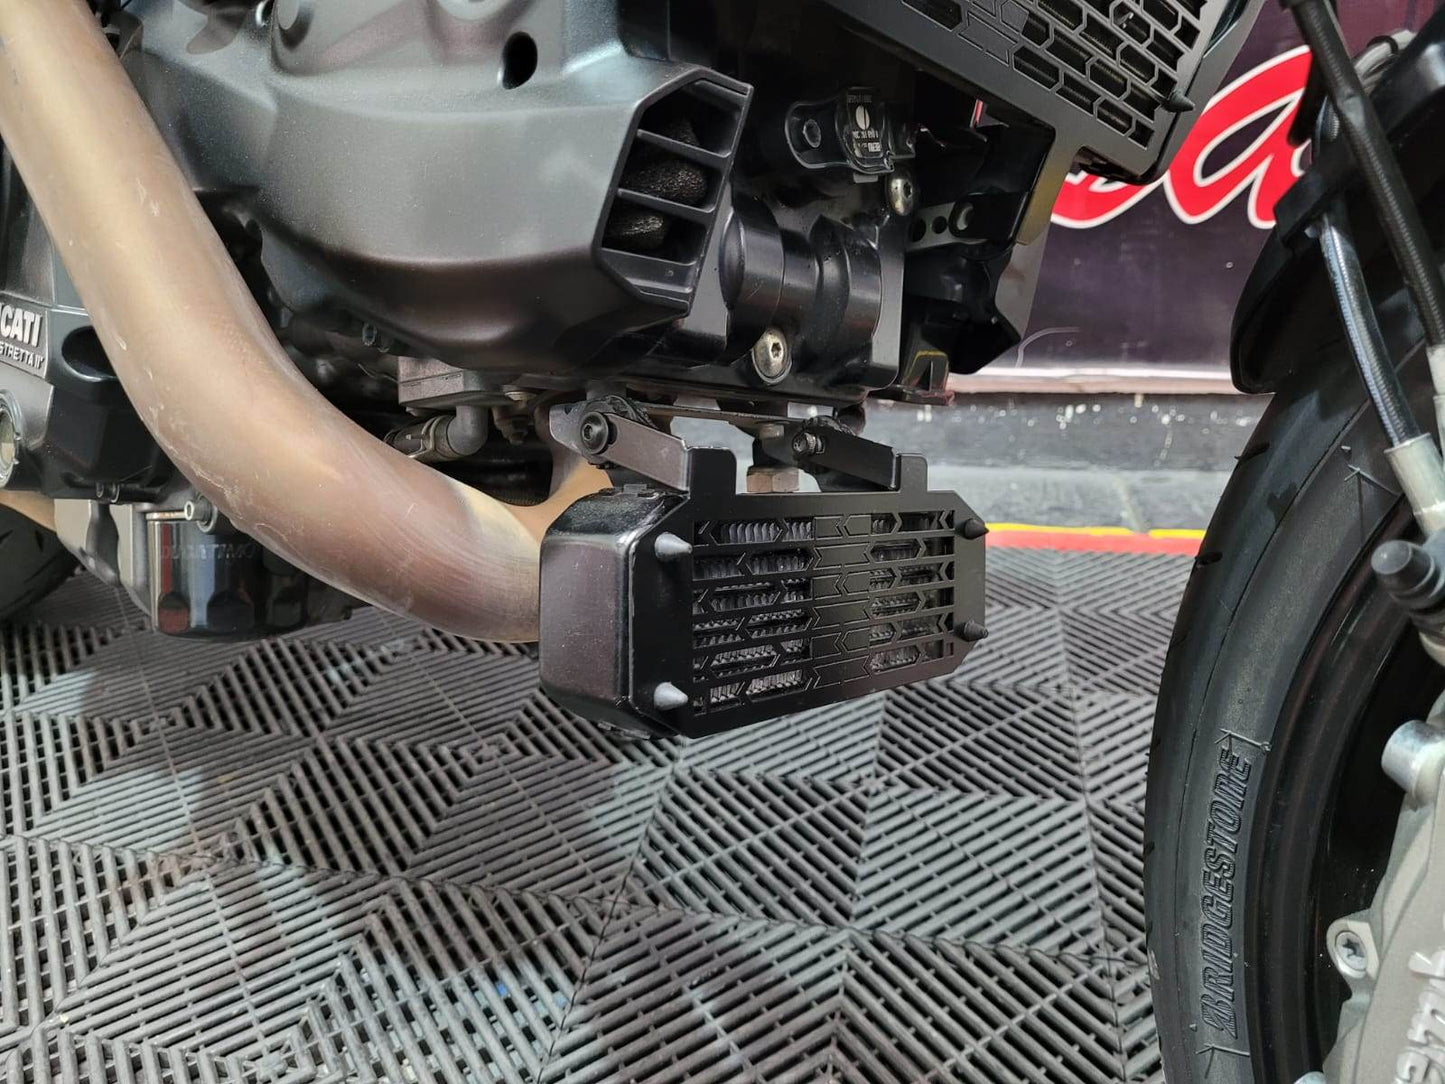 OIL COOLER PROTECTOR